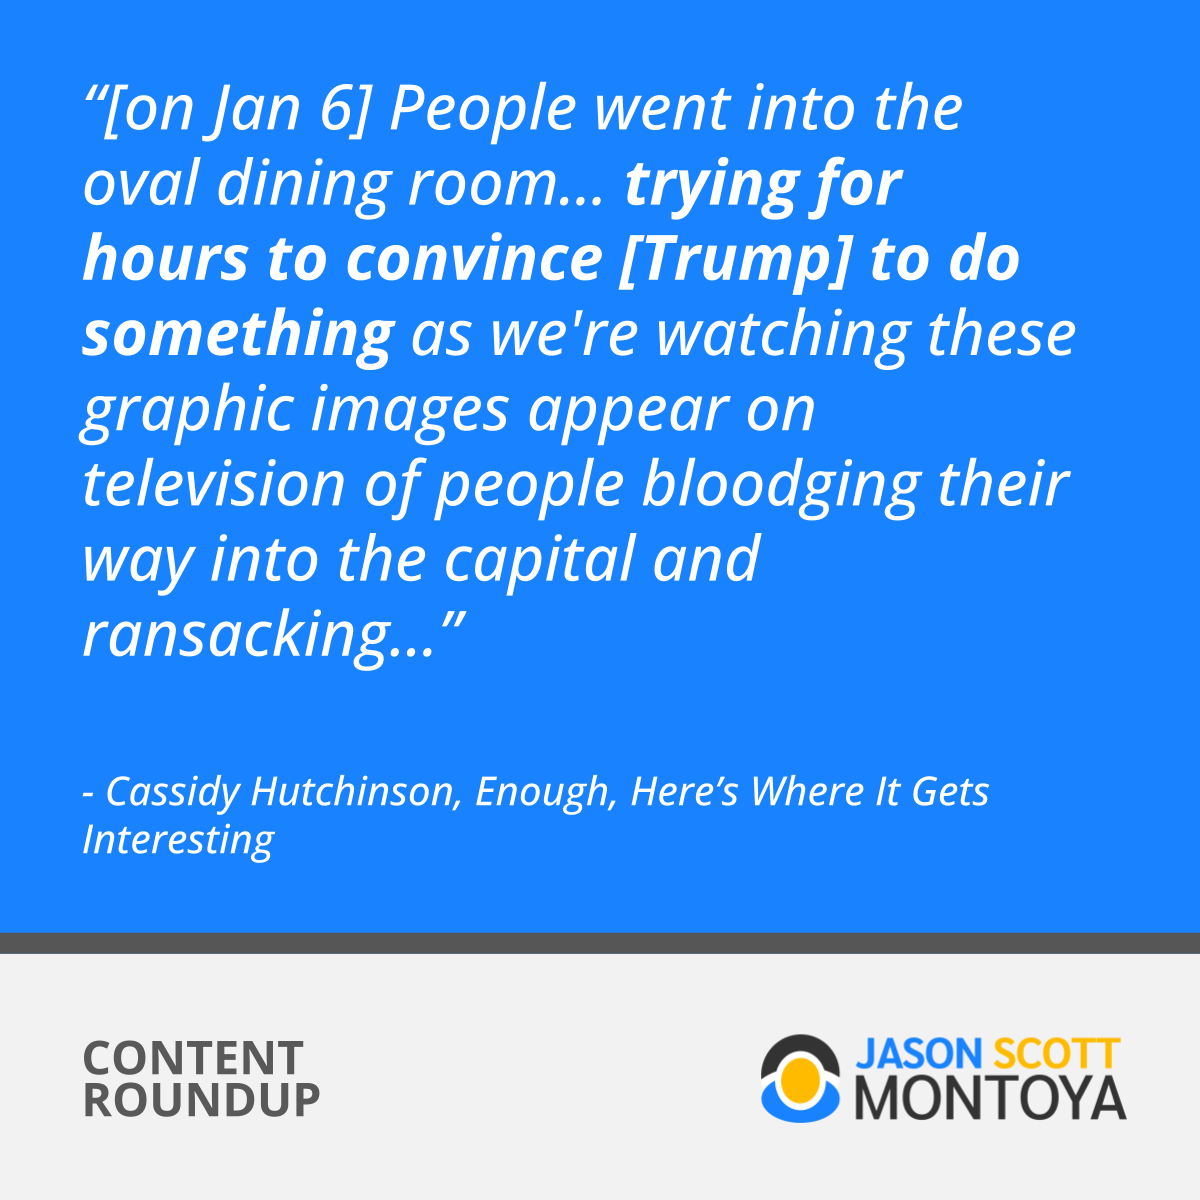 “[on Jan 6] People went into the oval dining room… trying for hours to convince [Trump] to do something as we're watching these graphic images appear on television of people bloodging their way into the capital and ransacking...”  - Cassidy Hutchinson, Enough, Here’s Where It Gets Interesting